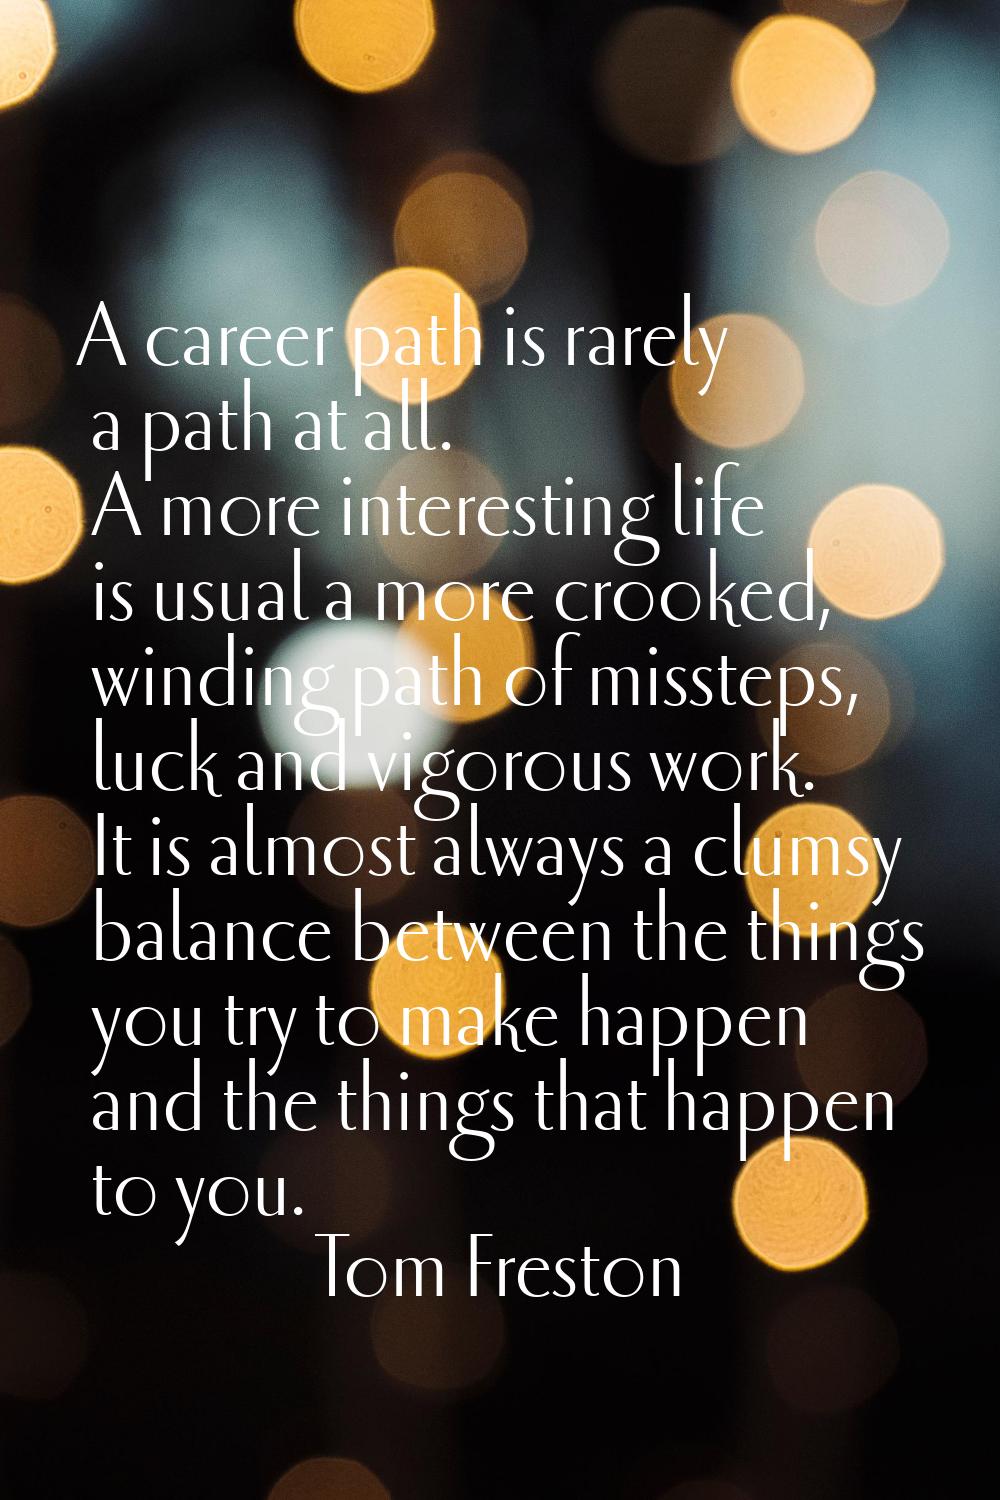 A career path is rarely a path at all. A more interesting life is usual a more crooked, winding pat